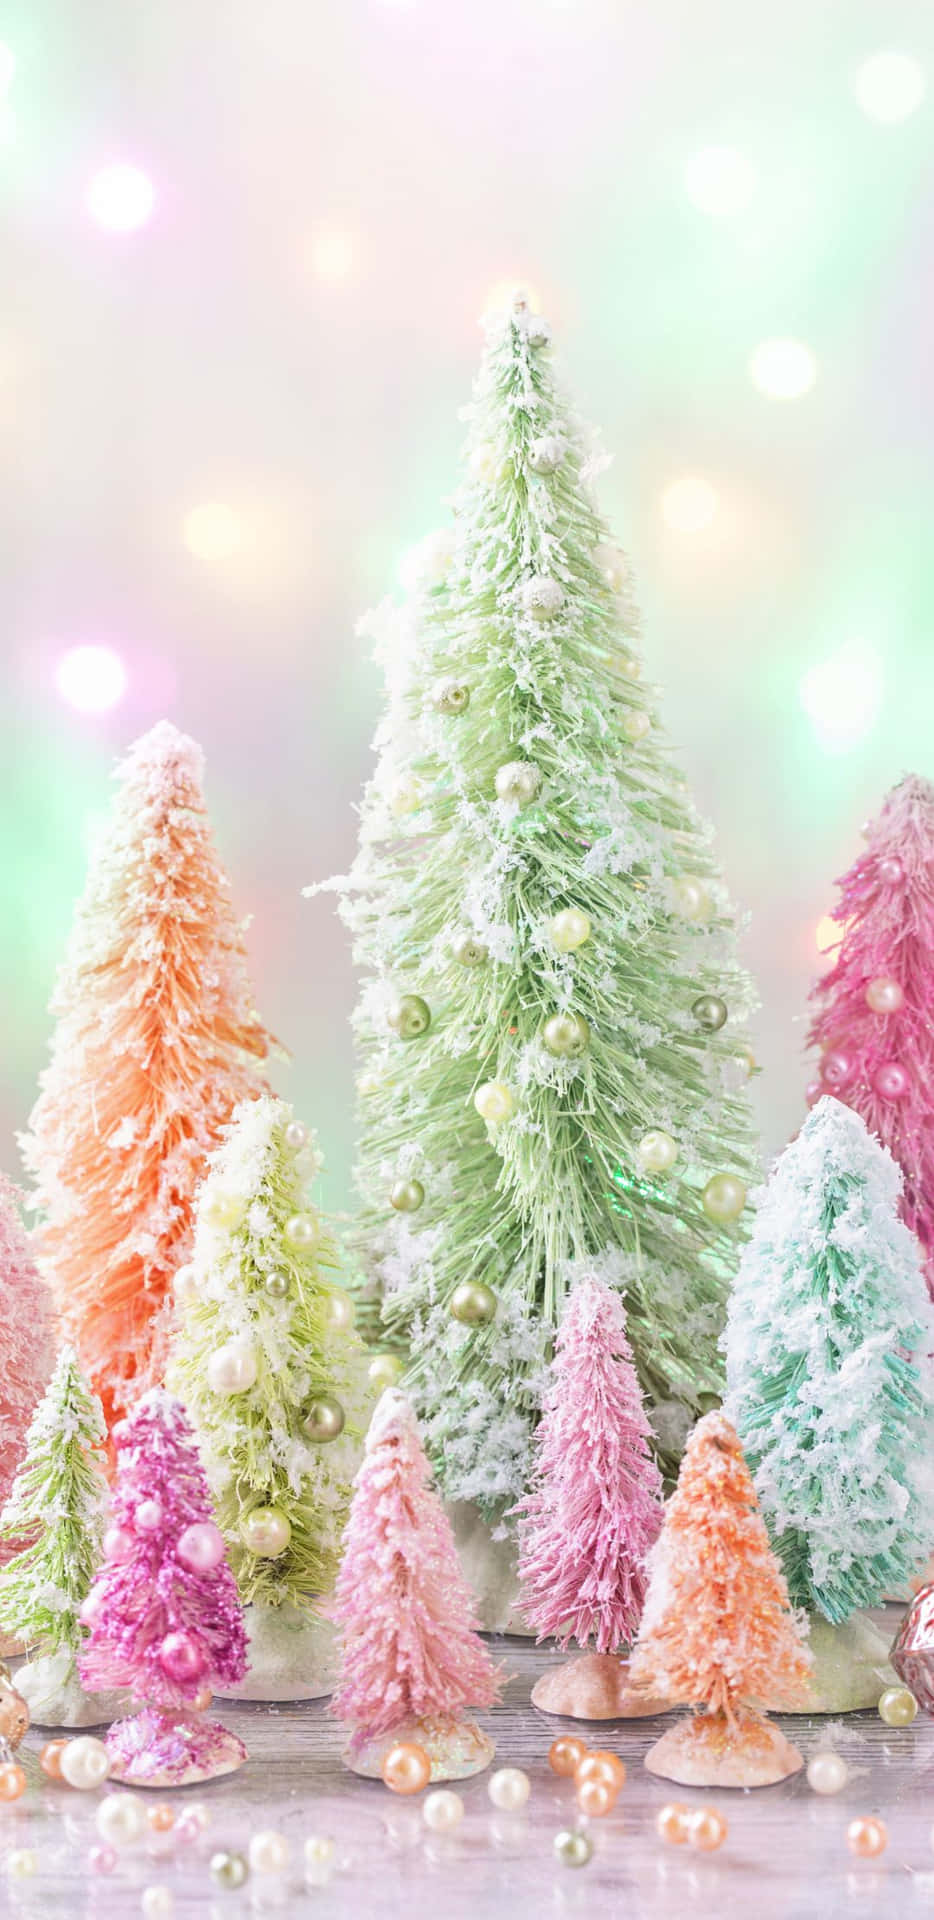 A Group Of Small Christmas Trees With Colored Frosting Wallpaper